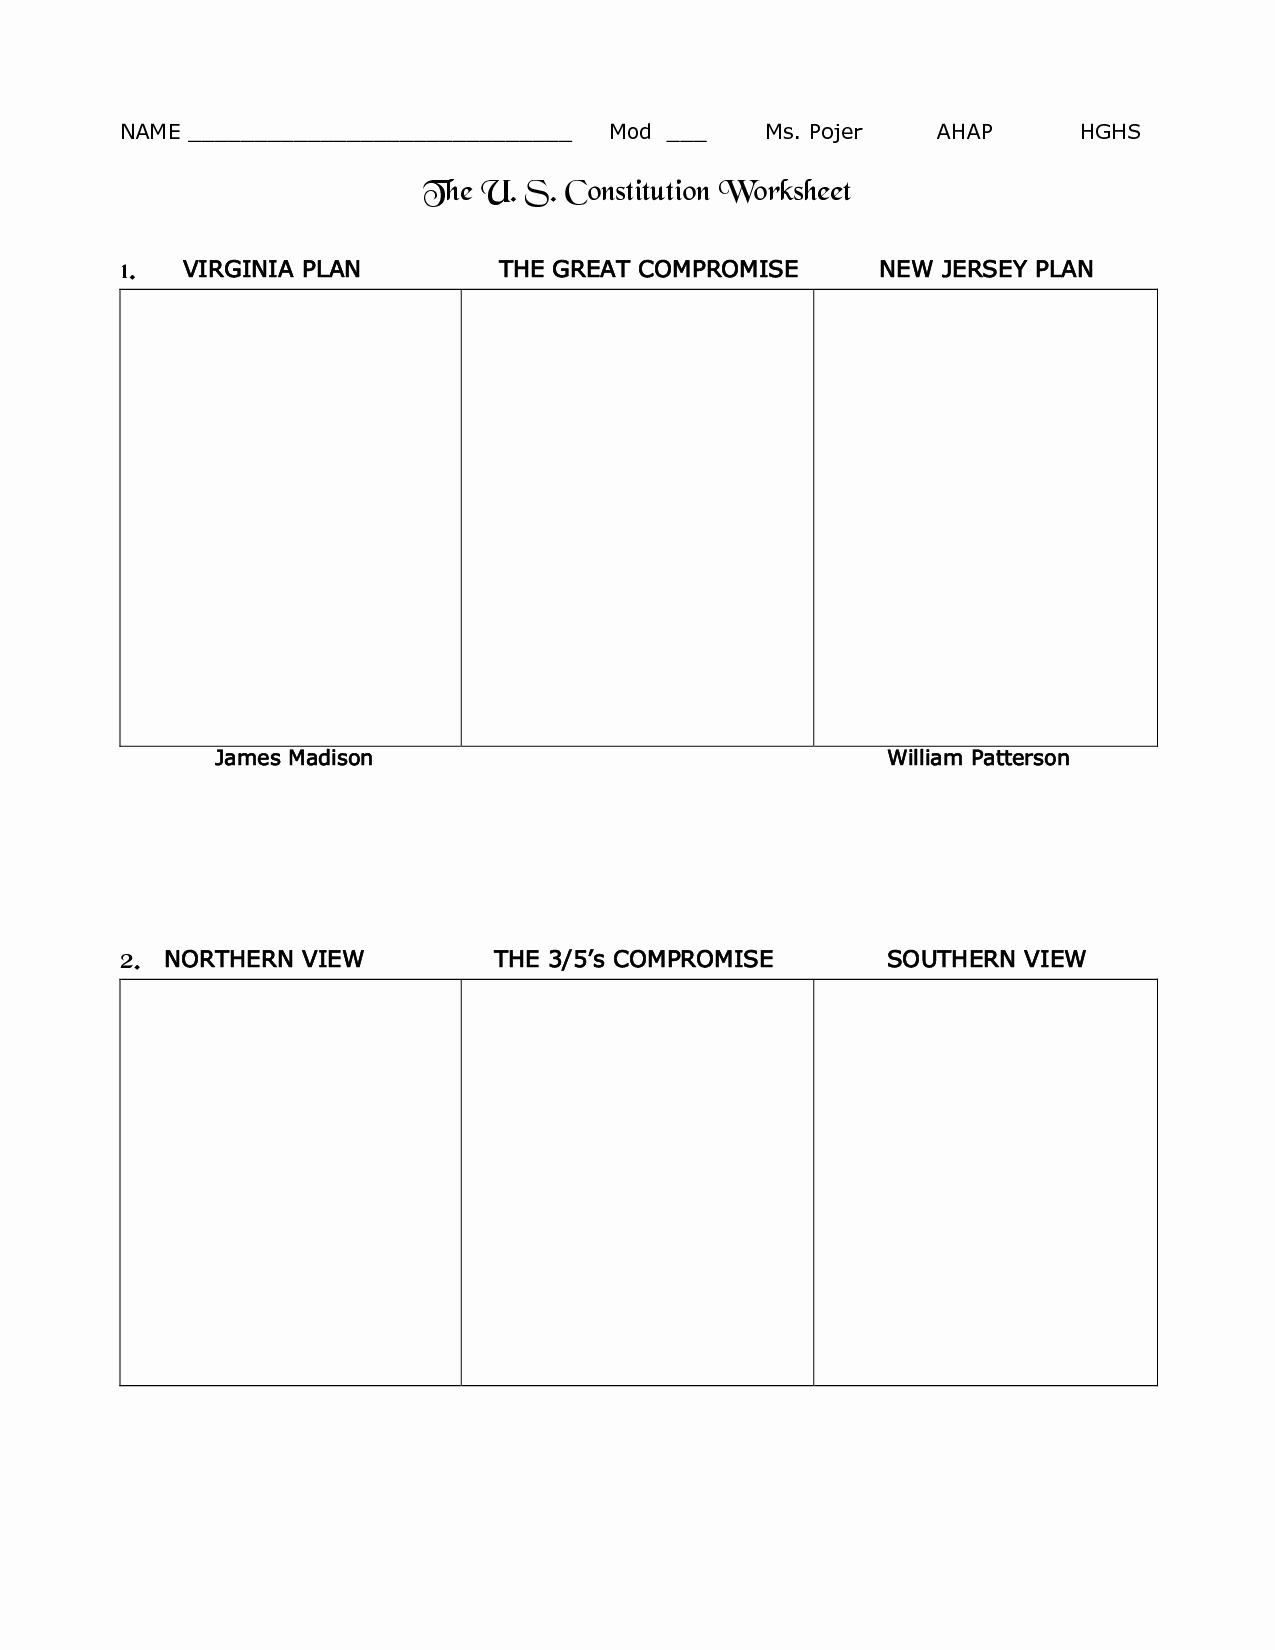 Anatomy Of the Constitution Worksheet Awesome Worksheet the Us Constitution Worksheet Worksheet Fun